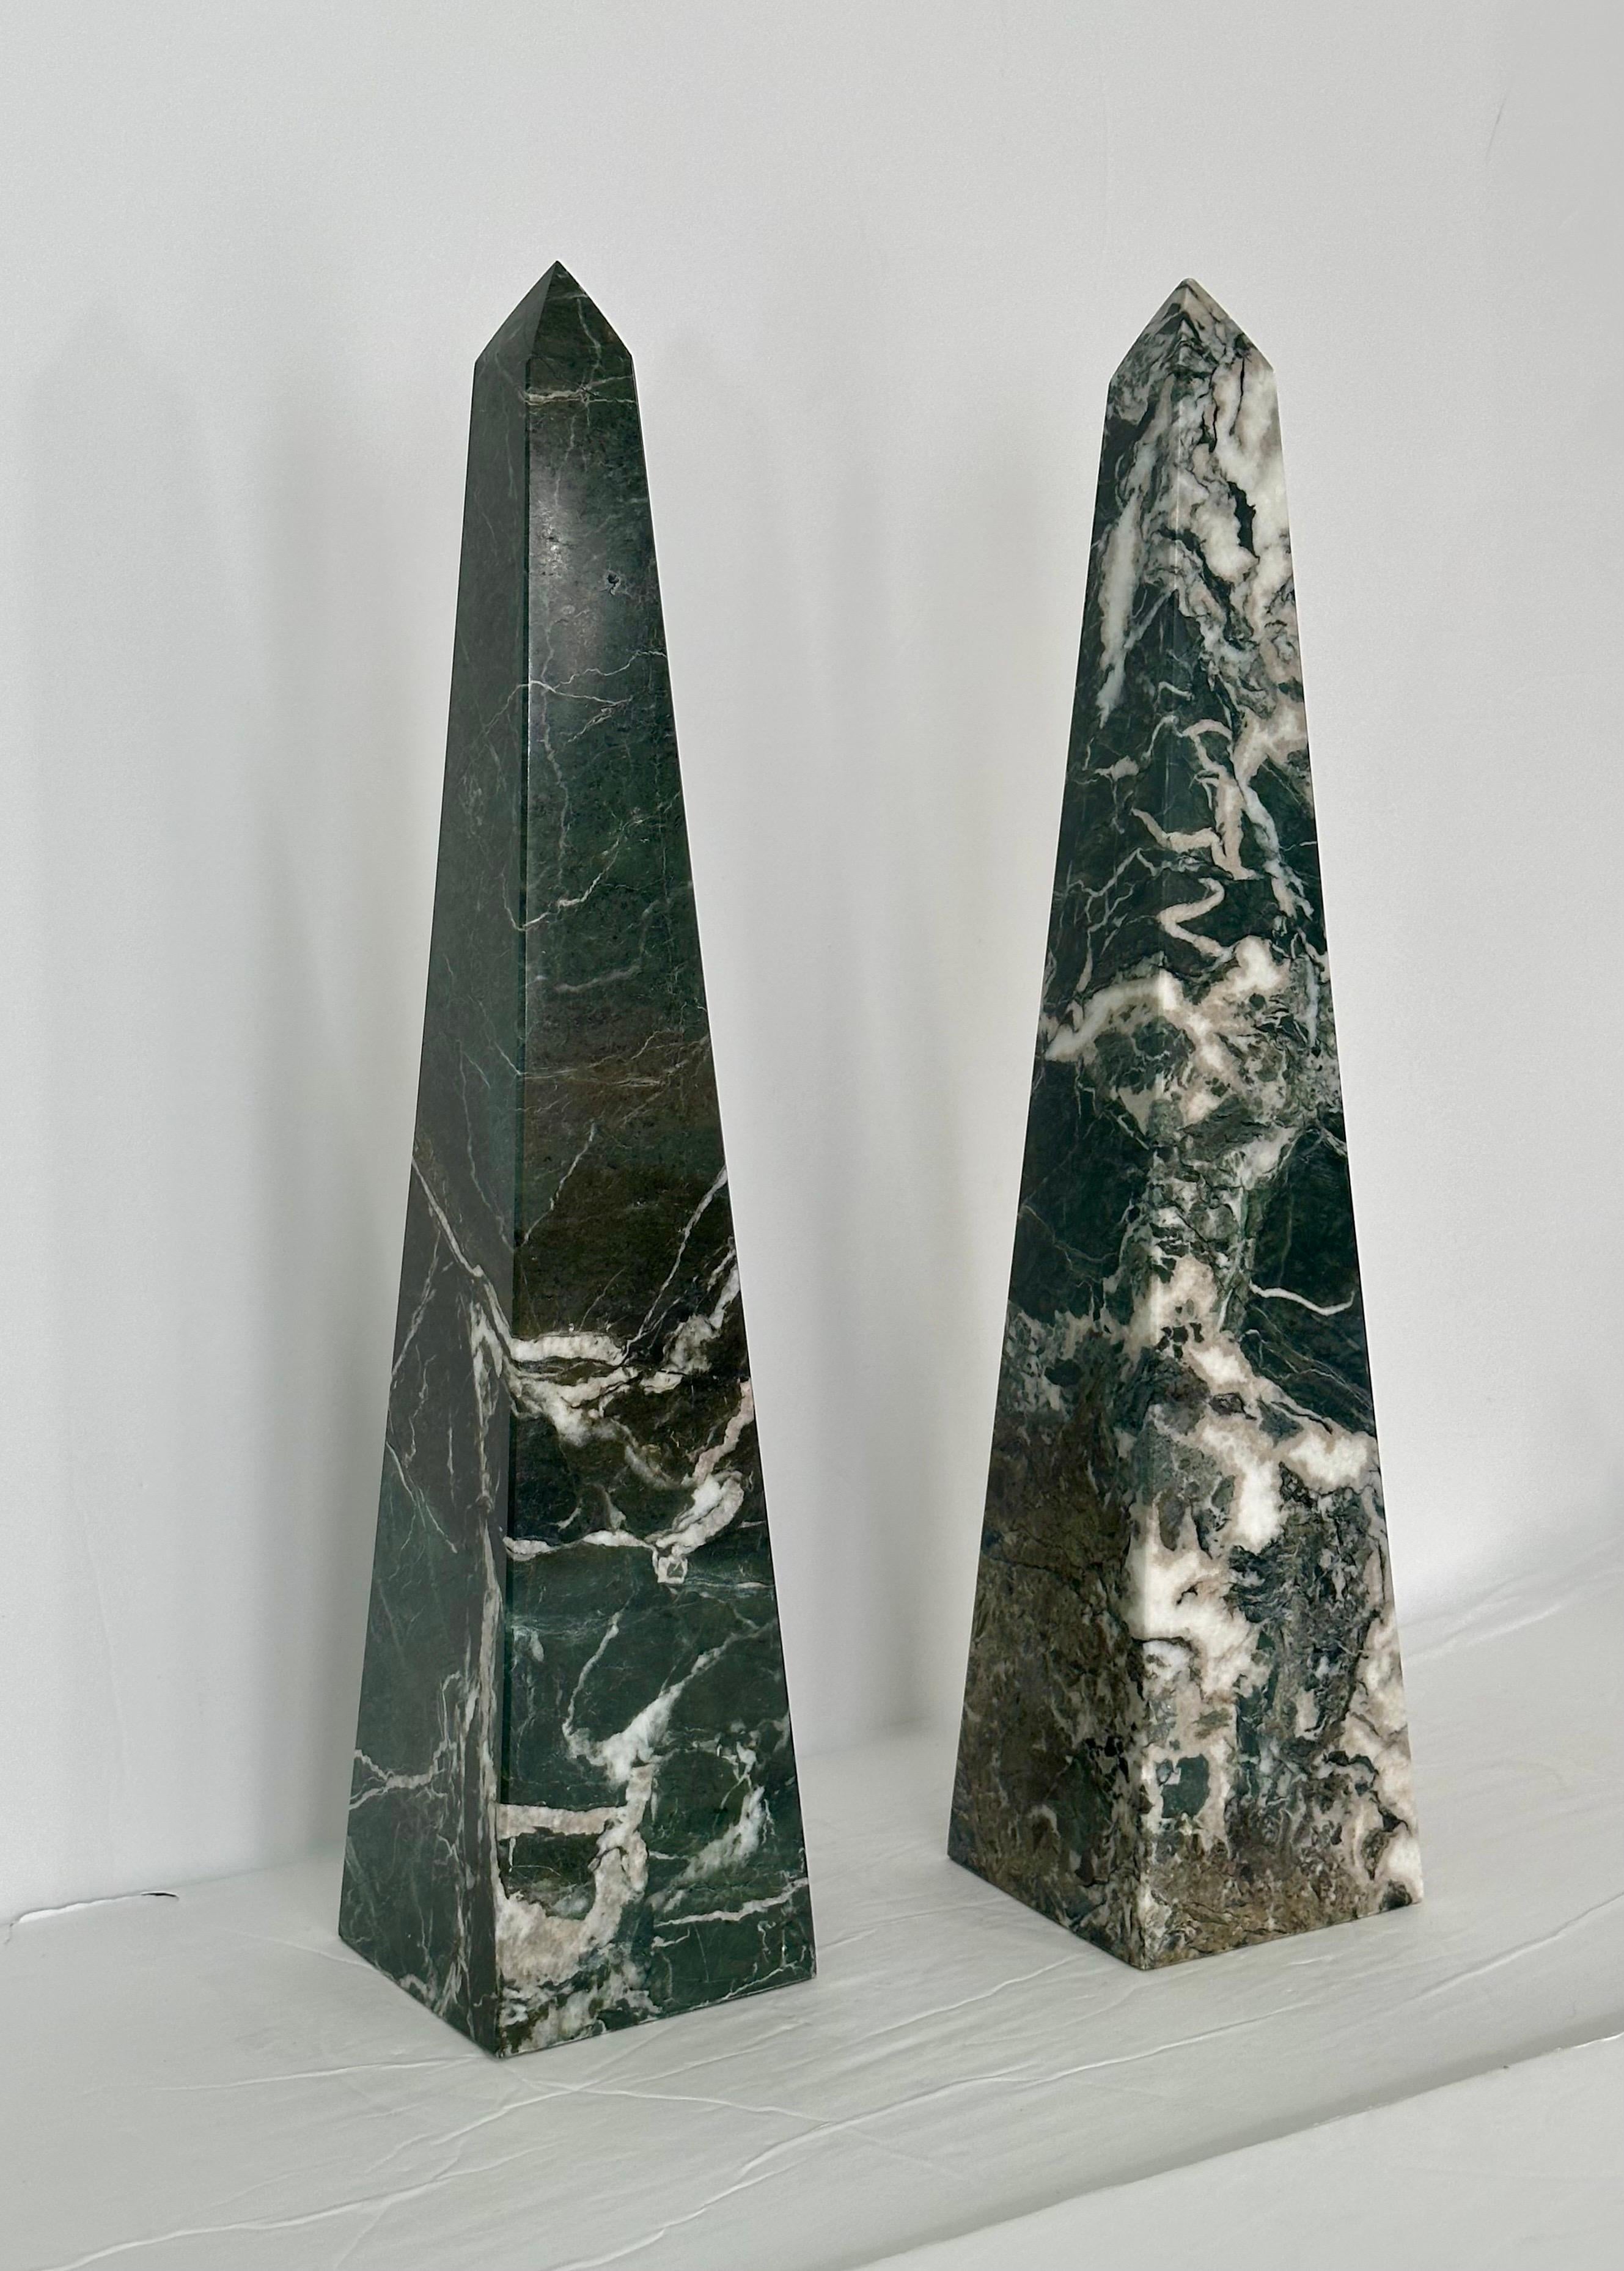 We are very pleased to offer a pair of beautiful stone obelisks, circa the 1970s.  Carved from fine marble, these obelisks boast a mesmerizing color palette that includes shades of green, white, and grey.  The vivid colors are accompanied by